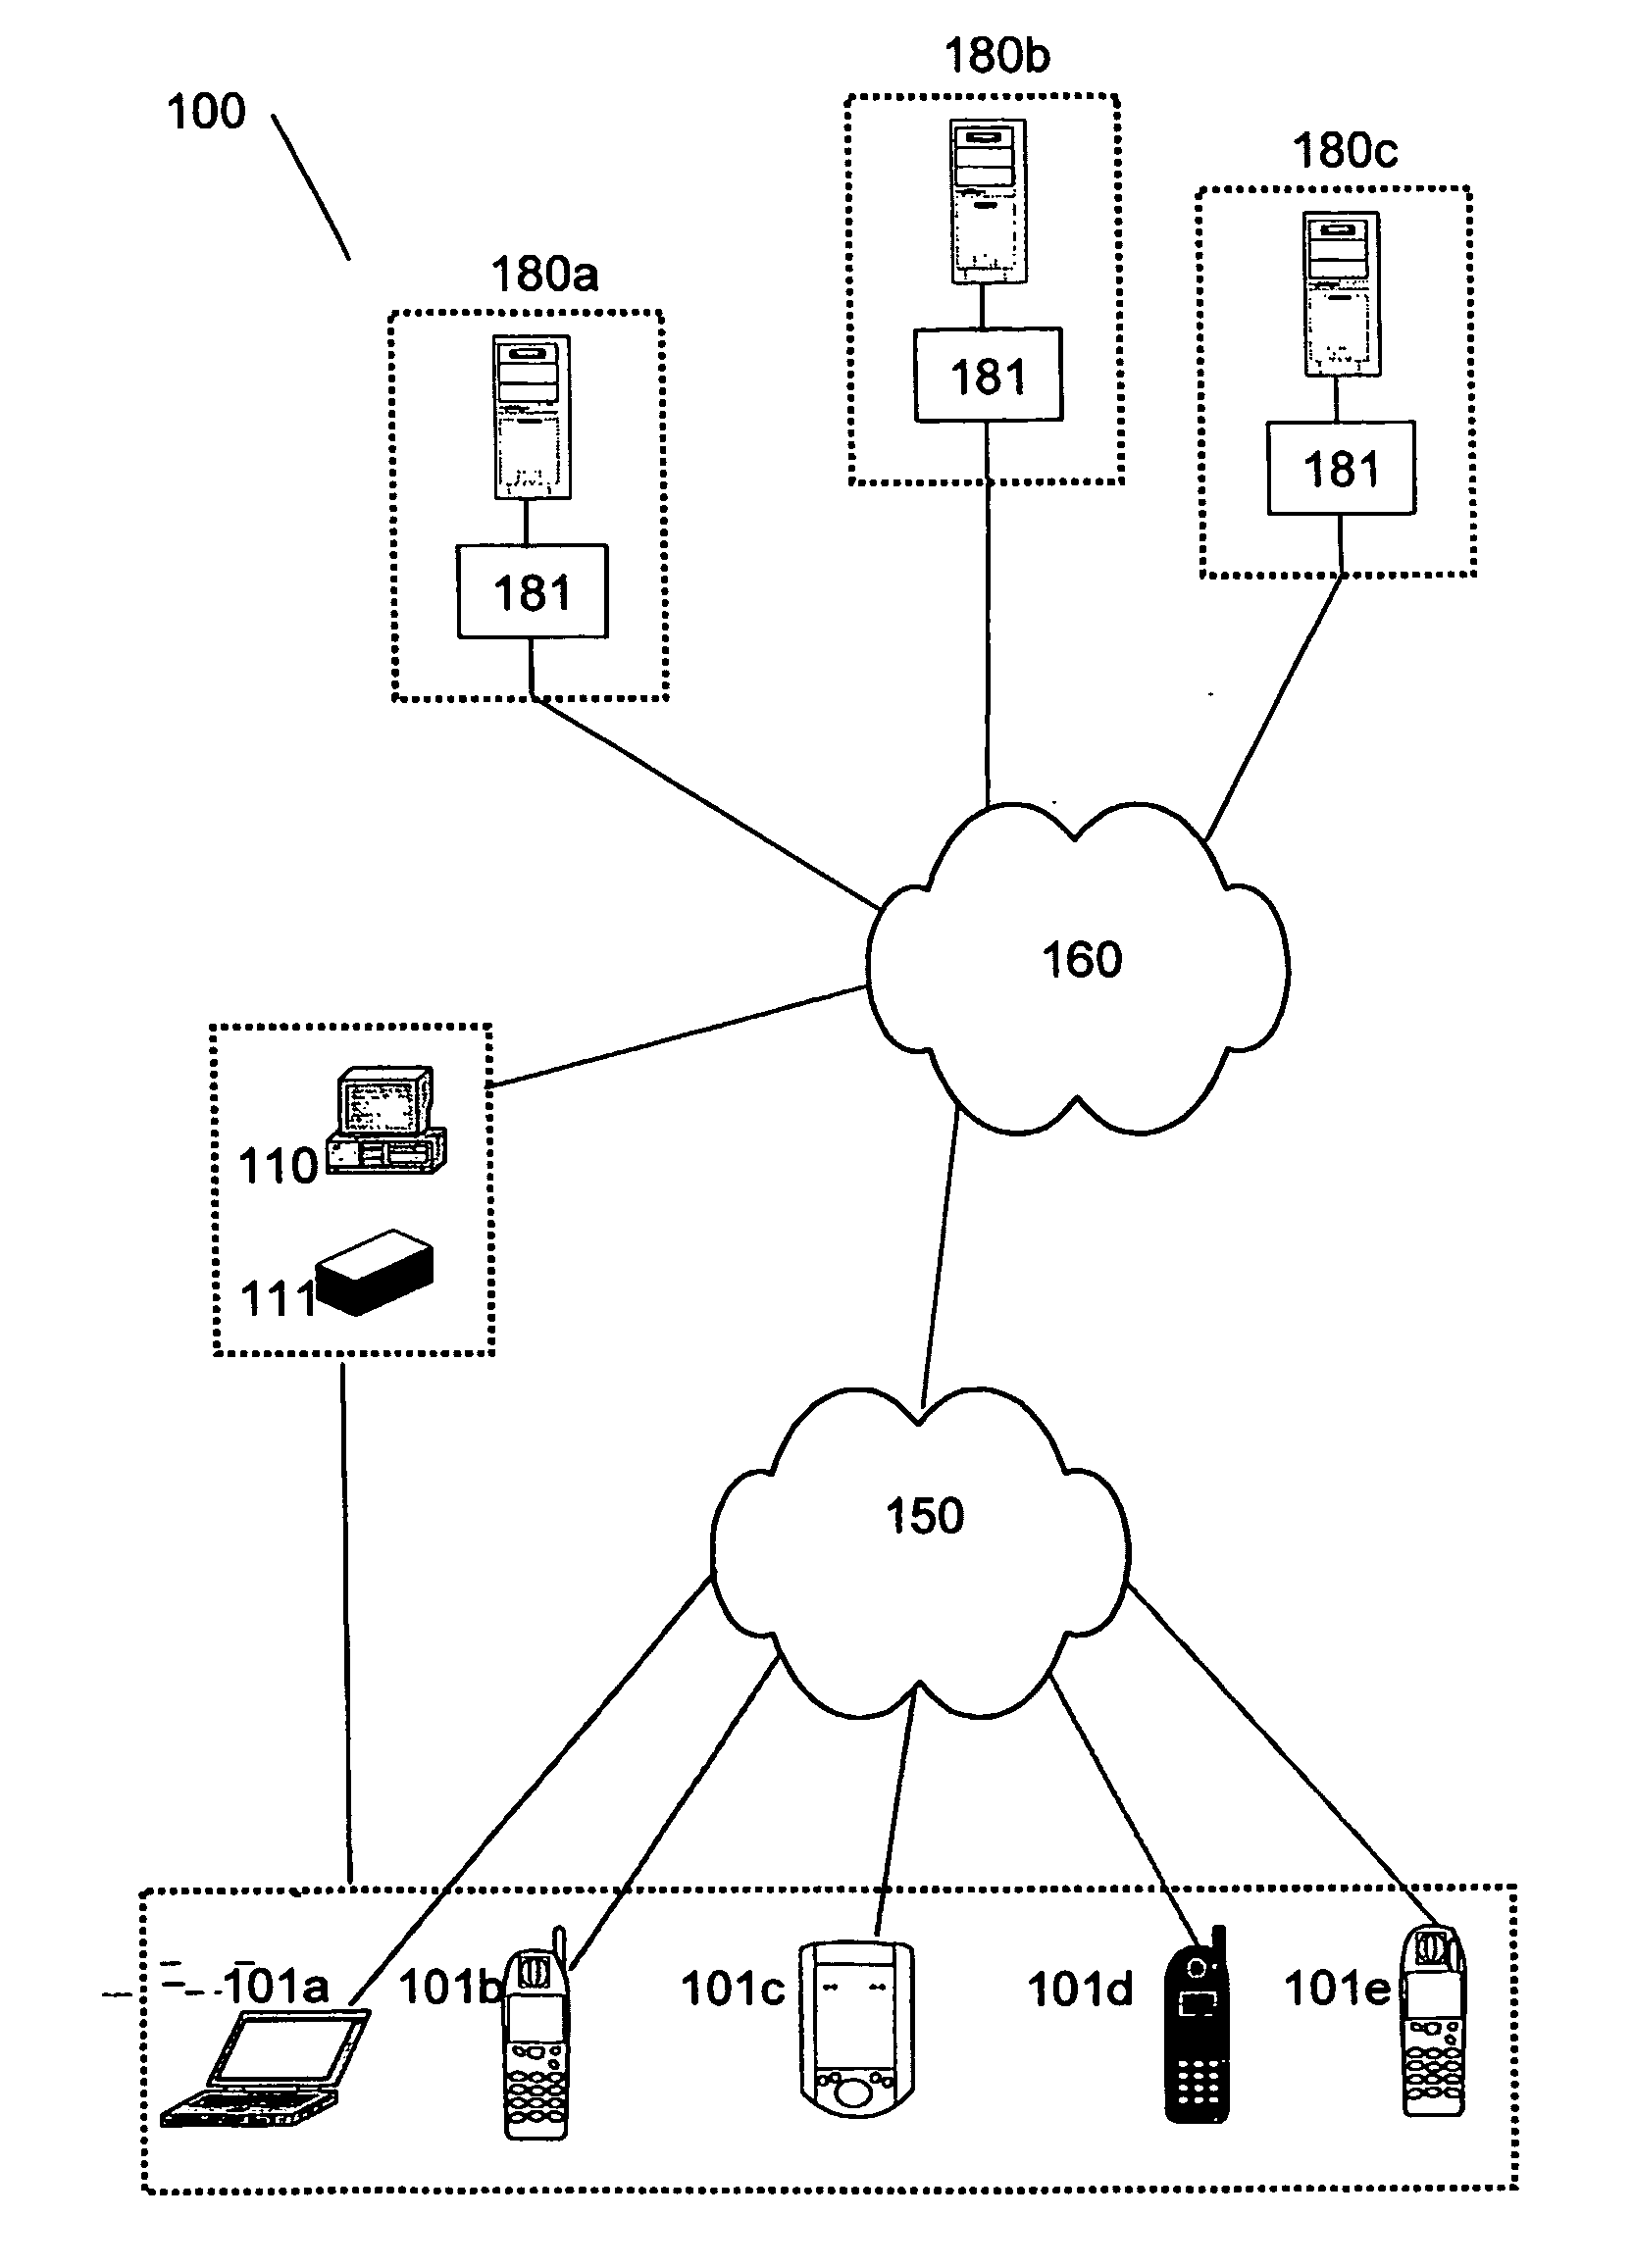 Massive role-playing games or other multiplayer games system and method using cellular phone or device